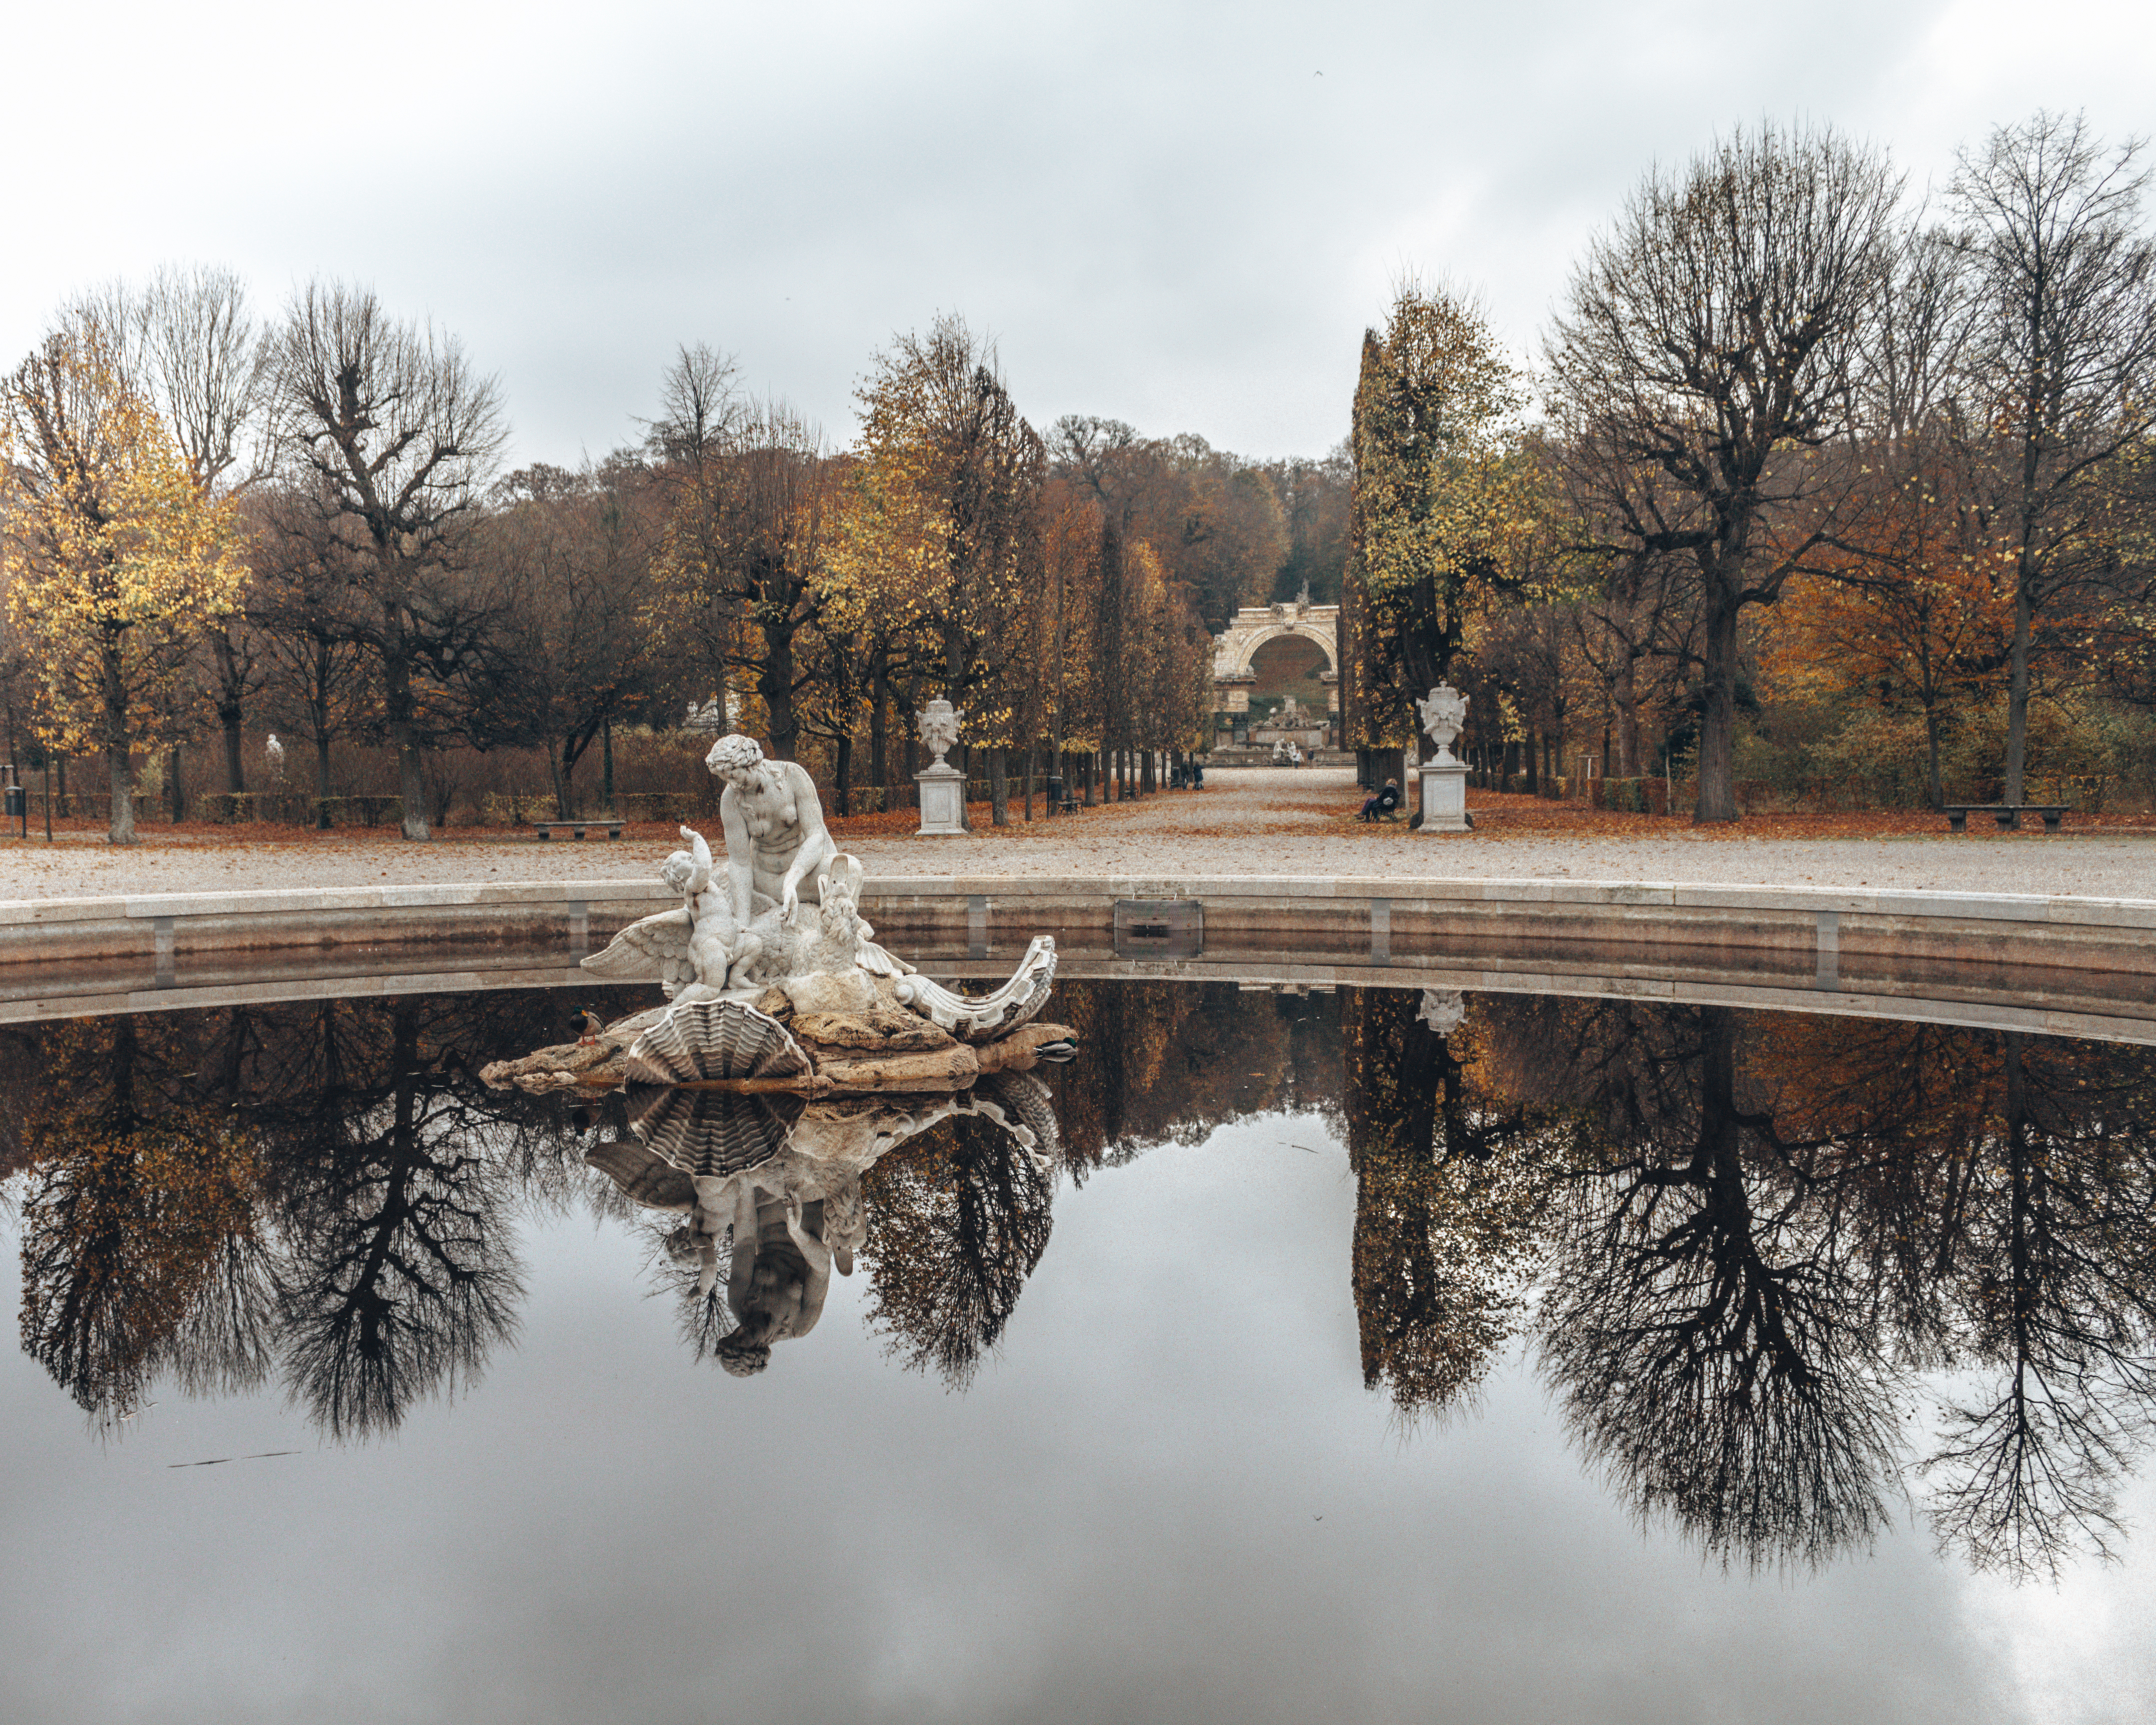 See the fountains in the Schönbrunn Palace in Vienna, Austria